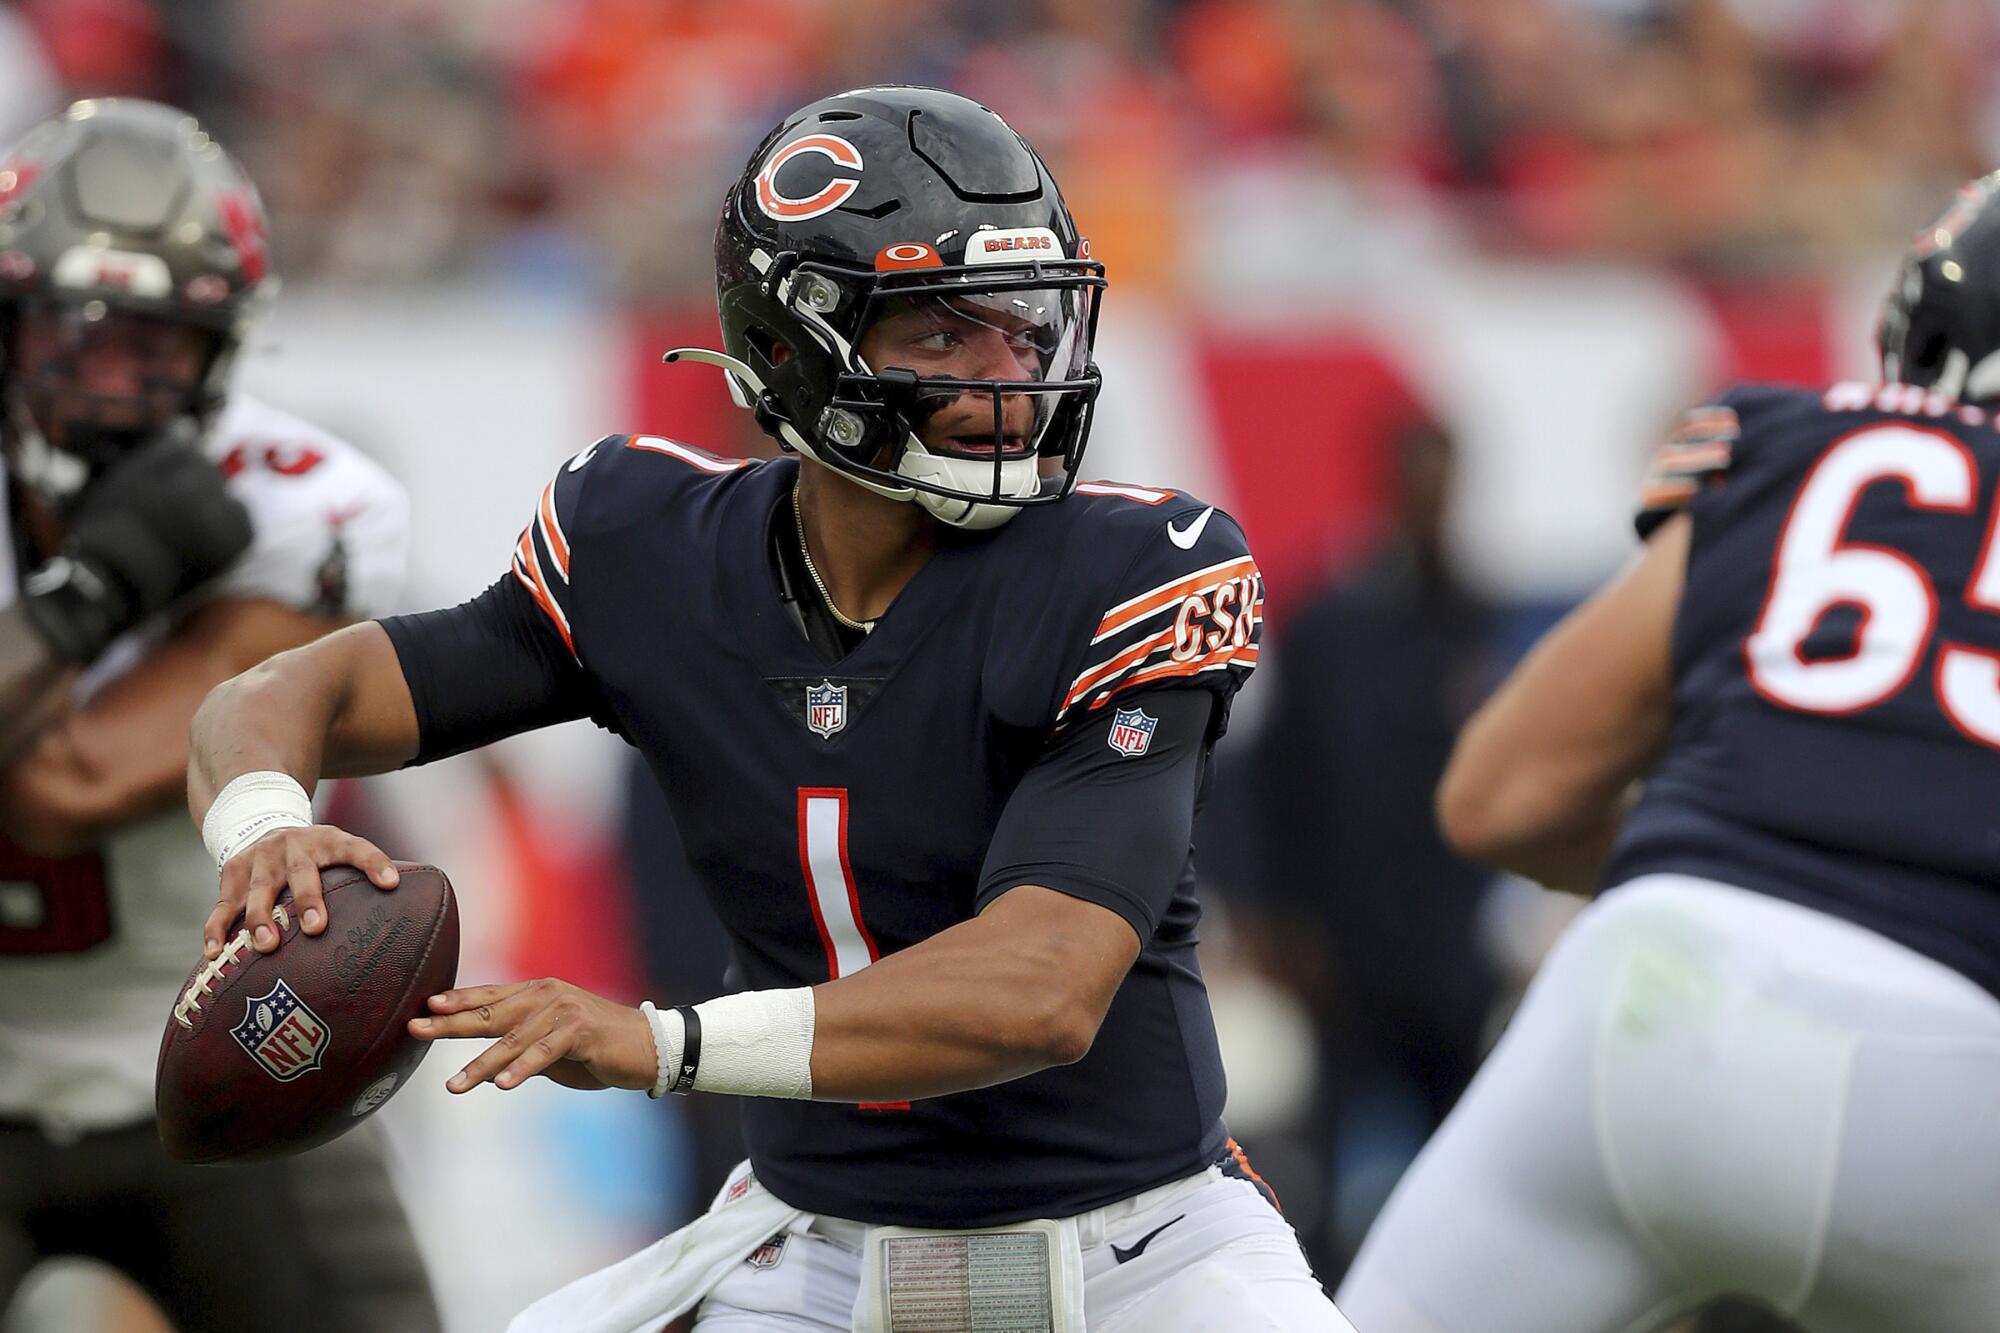 Chicago Bears quarterback Justin Fields attempts a pass during a game against the Tampa Bay Buccaneers.